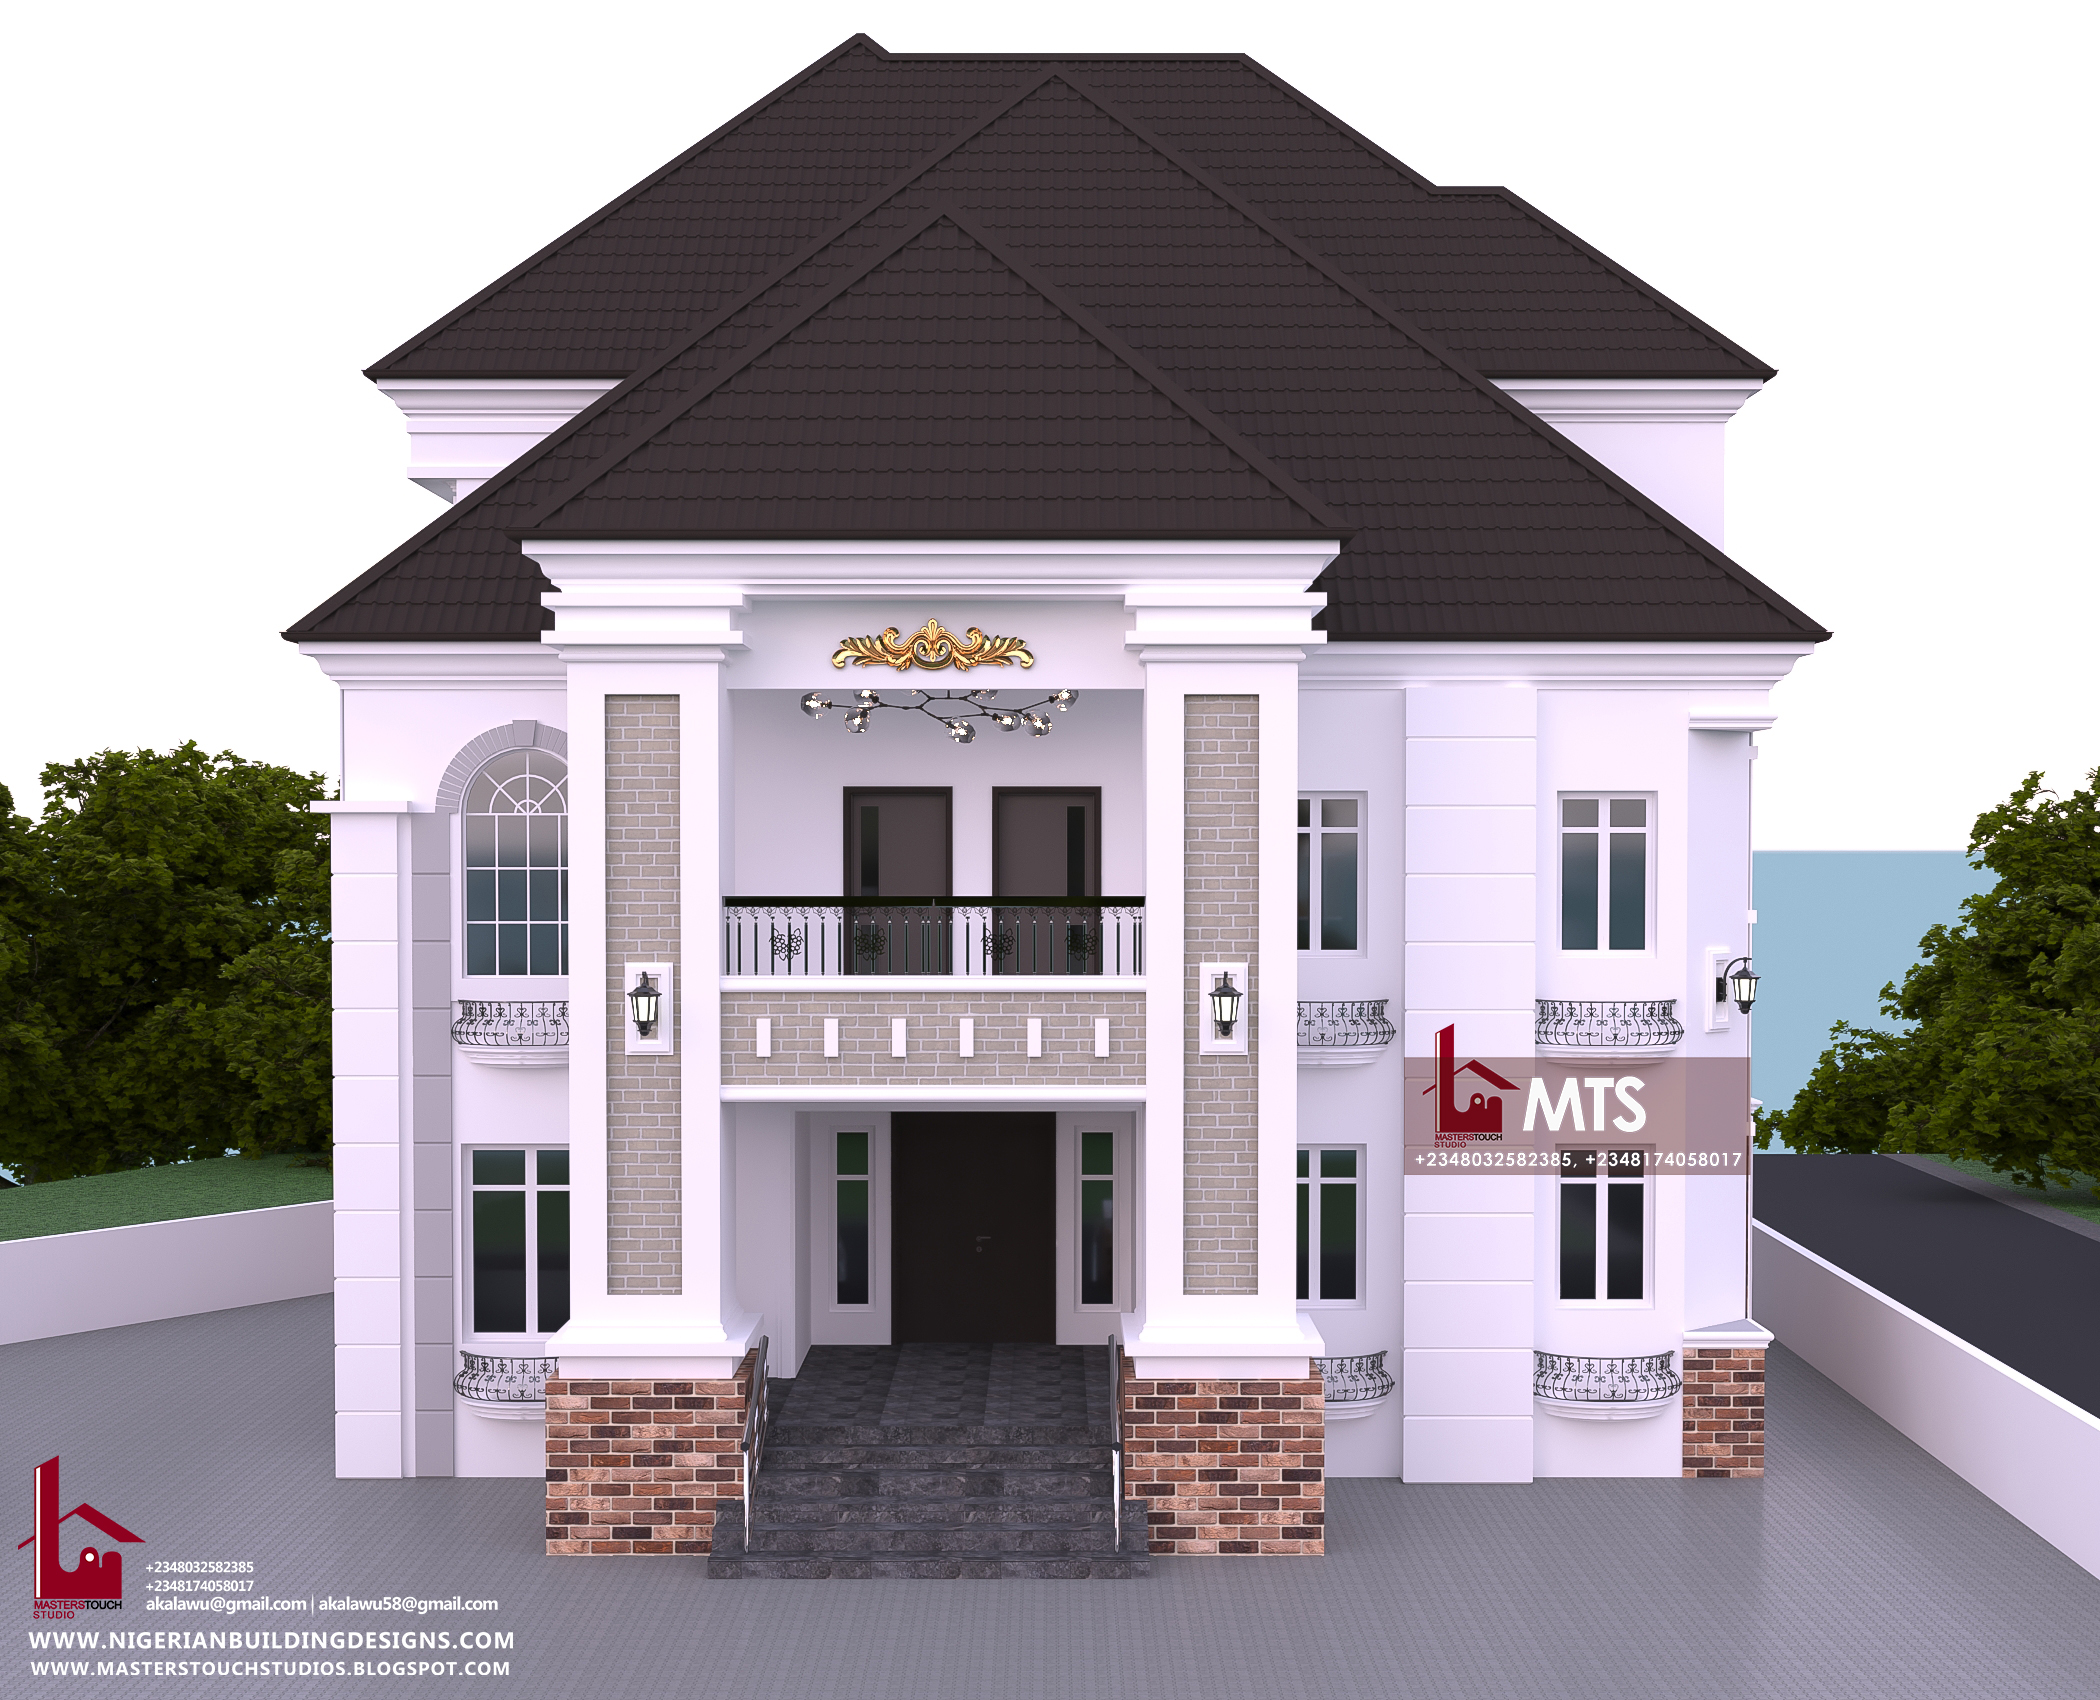 5 Bedroom Duplex Plan With Dimensions